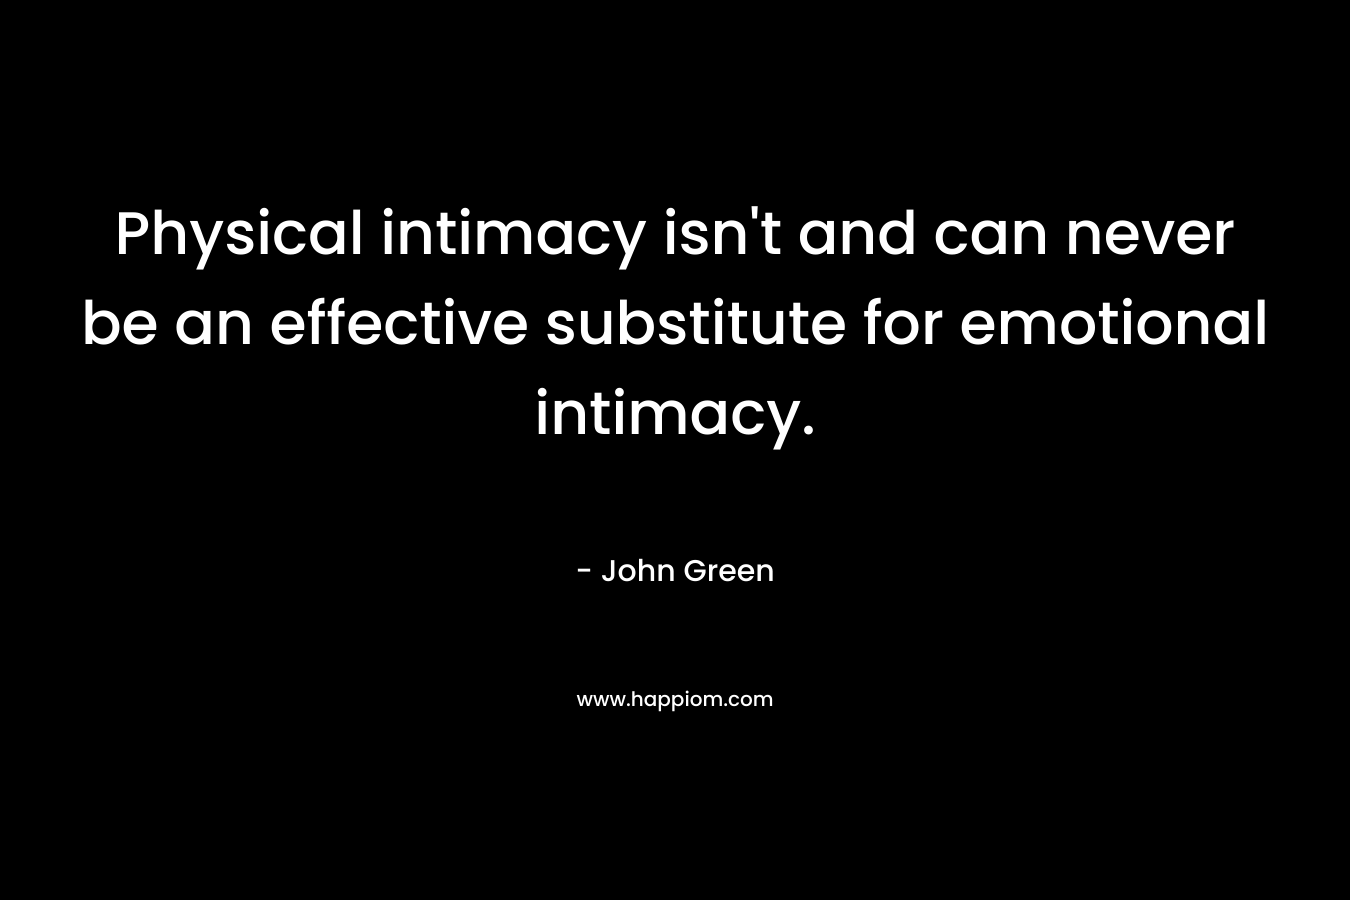 Physical intimacy isn’t and can never be an effective substitute for emotional intimacy. – John Green